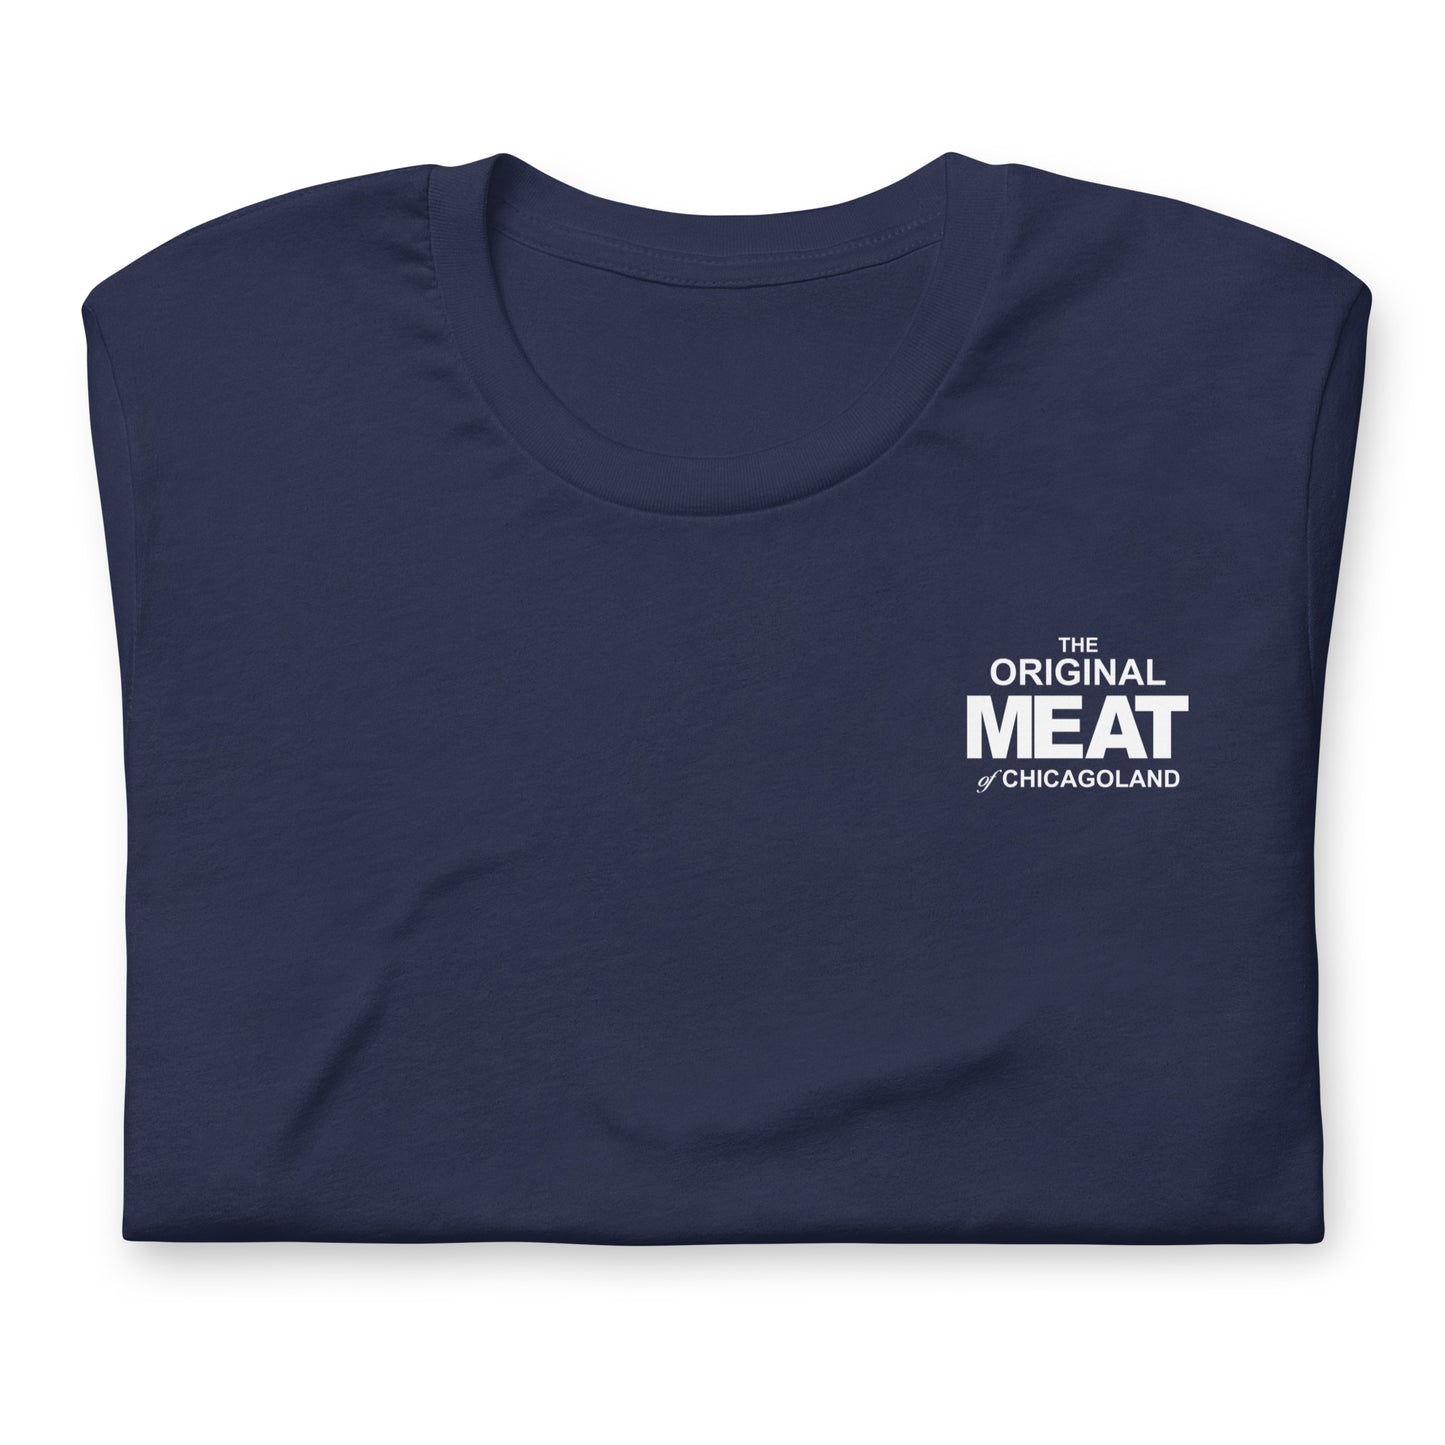 The Original MEAT of Chicagoland Blue Variant Unisex t-shirt